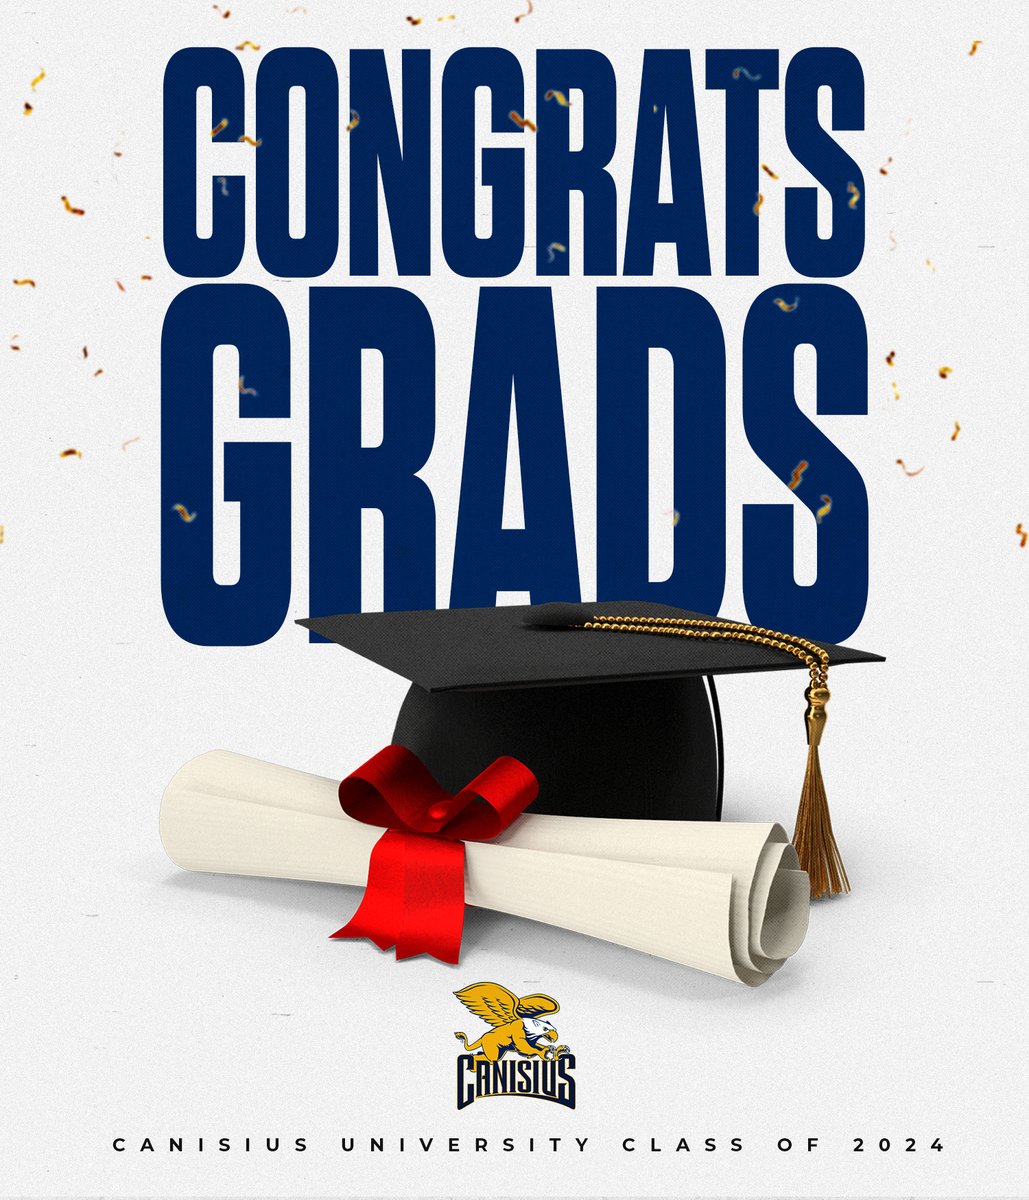 “A great accomplishment shouldn’t be the end of the road, just the starting point for the next leap forward.” — Harvey Mackay To the @Canisius_Univ Class of 2024, congratulations and best of luck in all that lies ahead! #Griffs